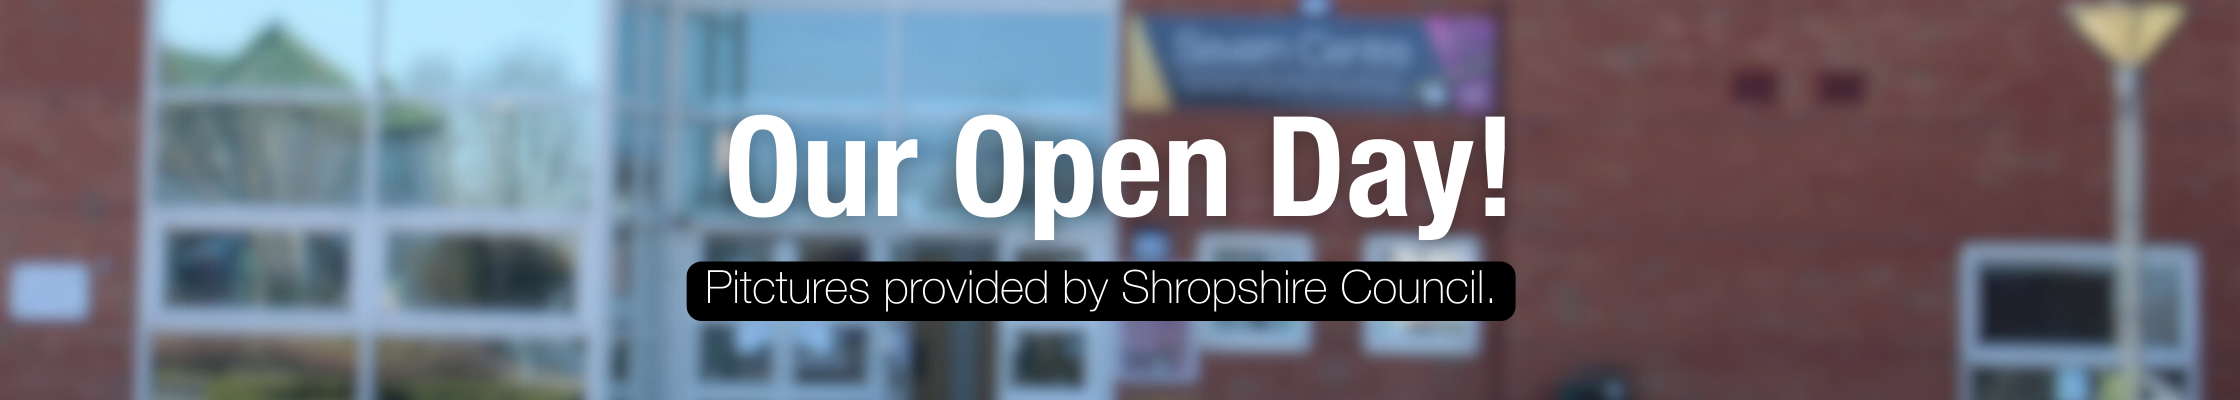 sc gp post banner open day